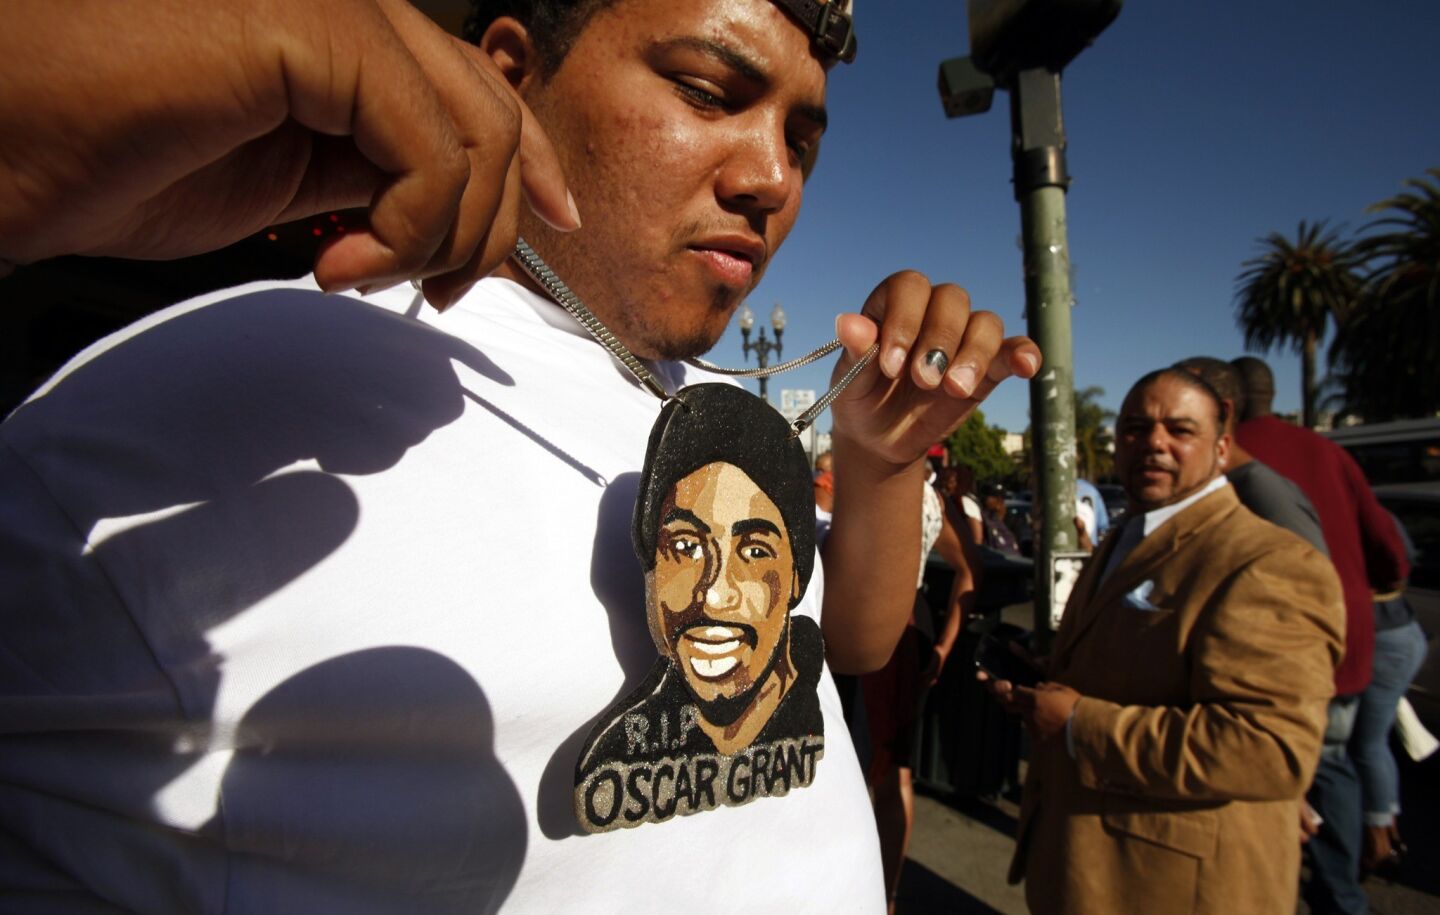 Nigel Bryson, 23, who had been riding the train with Oscar Grant the night he was killed in 2009, wears a large pendant painted with Grant's face on it to the Oakland premiere of "Fruitvale Station" at the Grand Lake Theatre on June 20, 2013.